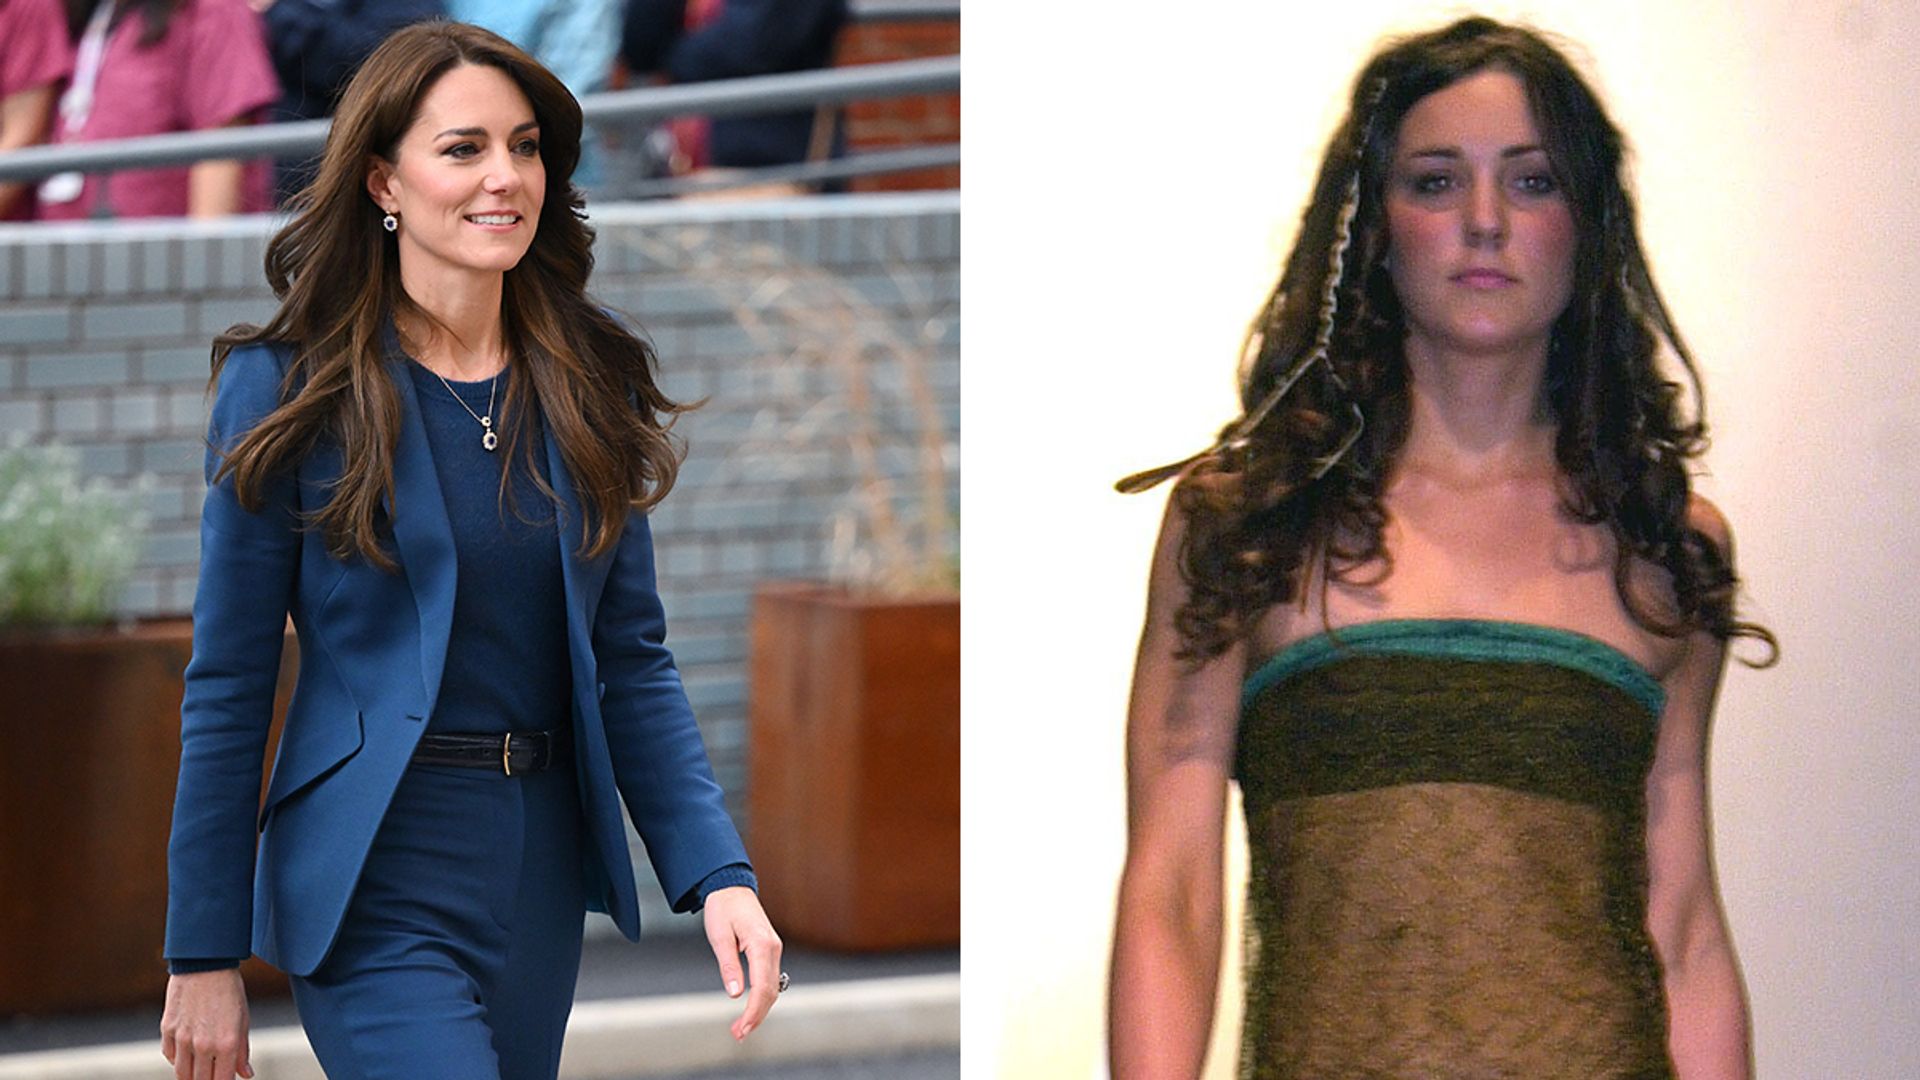 Split image of Kate Middleton in a suit and her in the sheer dress and bikini